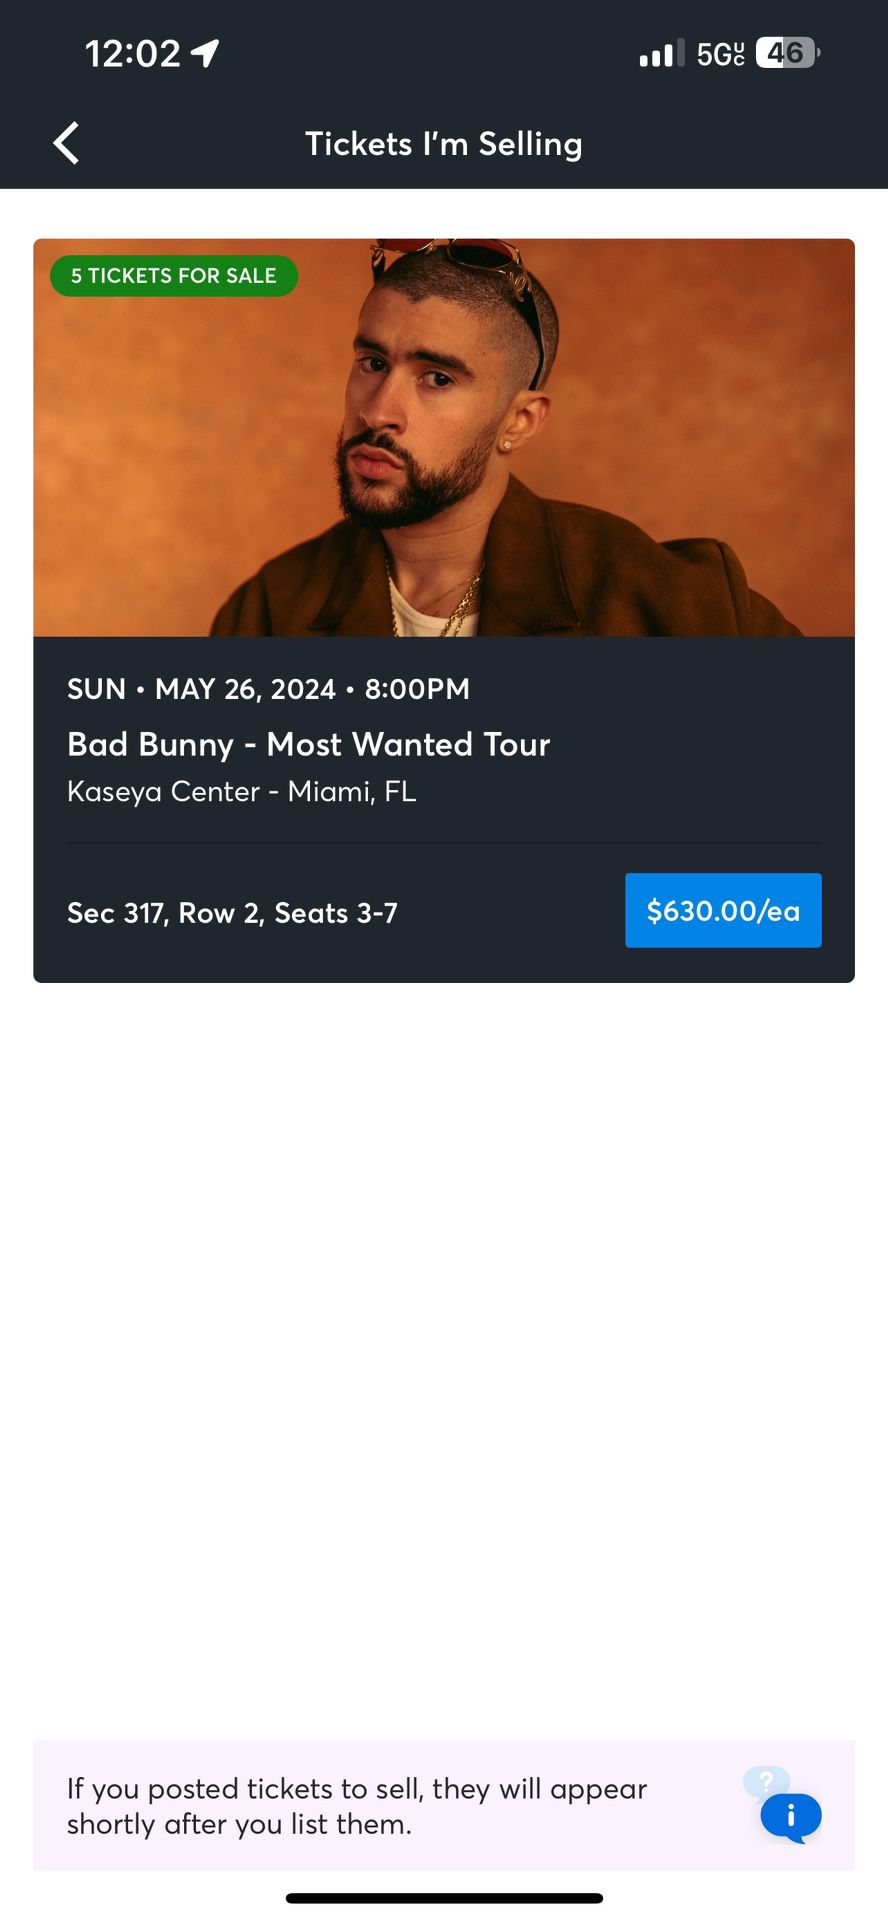 Selling 5 Bad bunny tickets - Sunday 26th